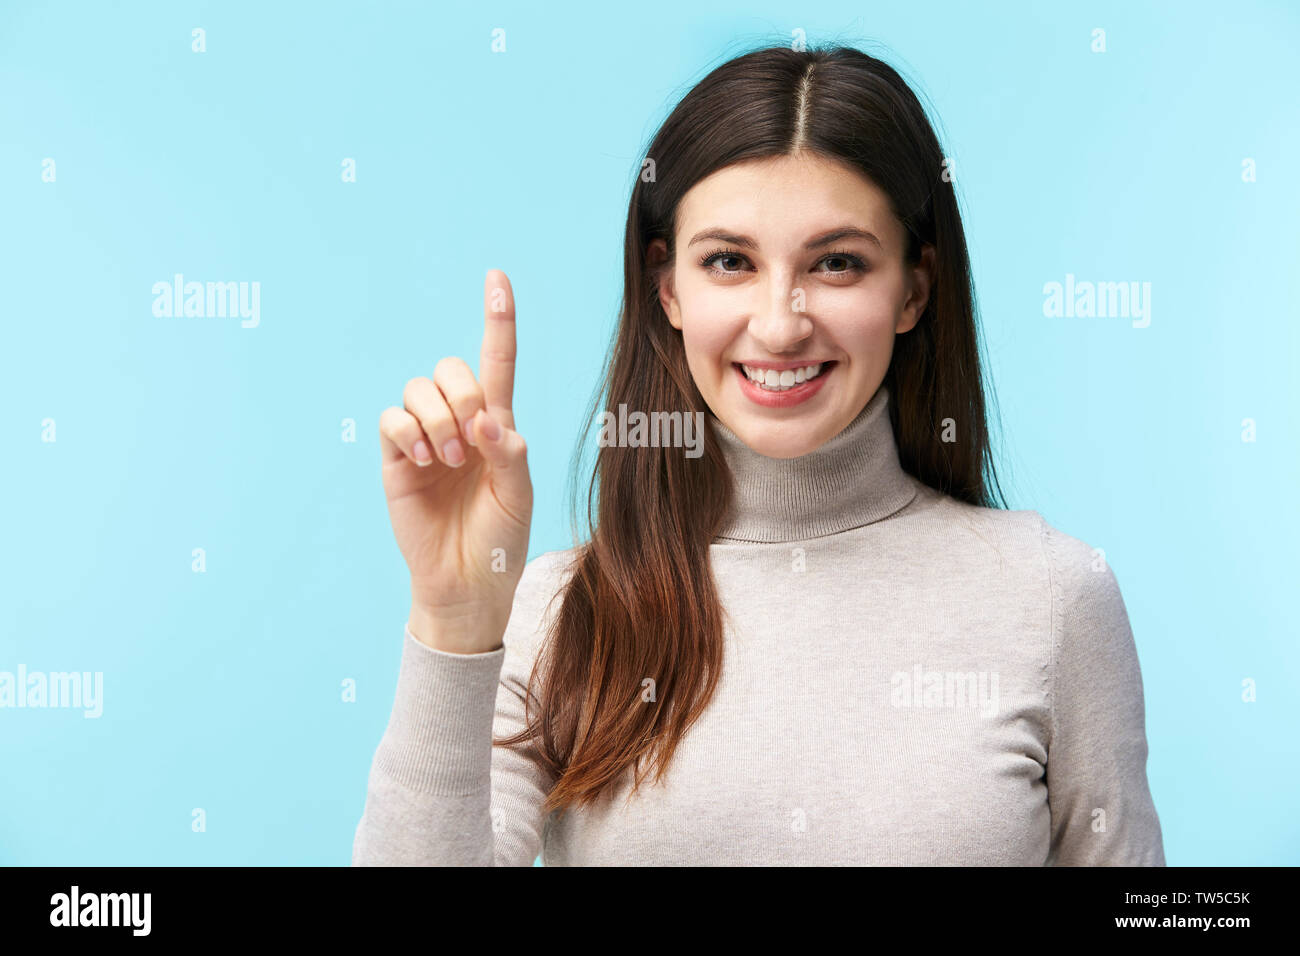 beautiful young caucasian woman pressing a virtual button, looking at camera smiling, isolated on blue background Stock Photo